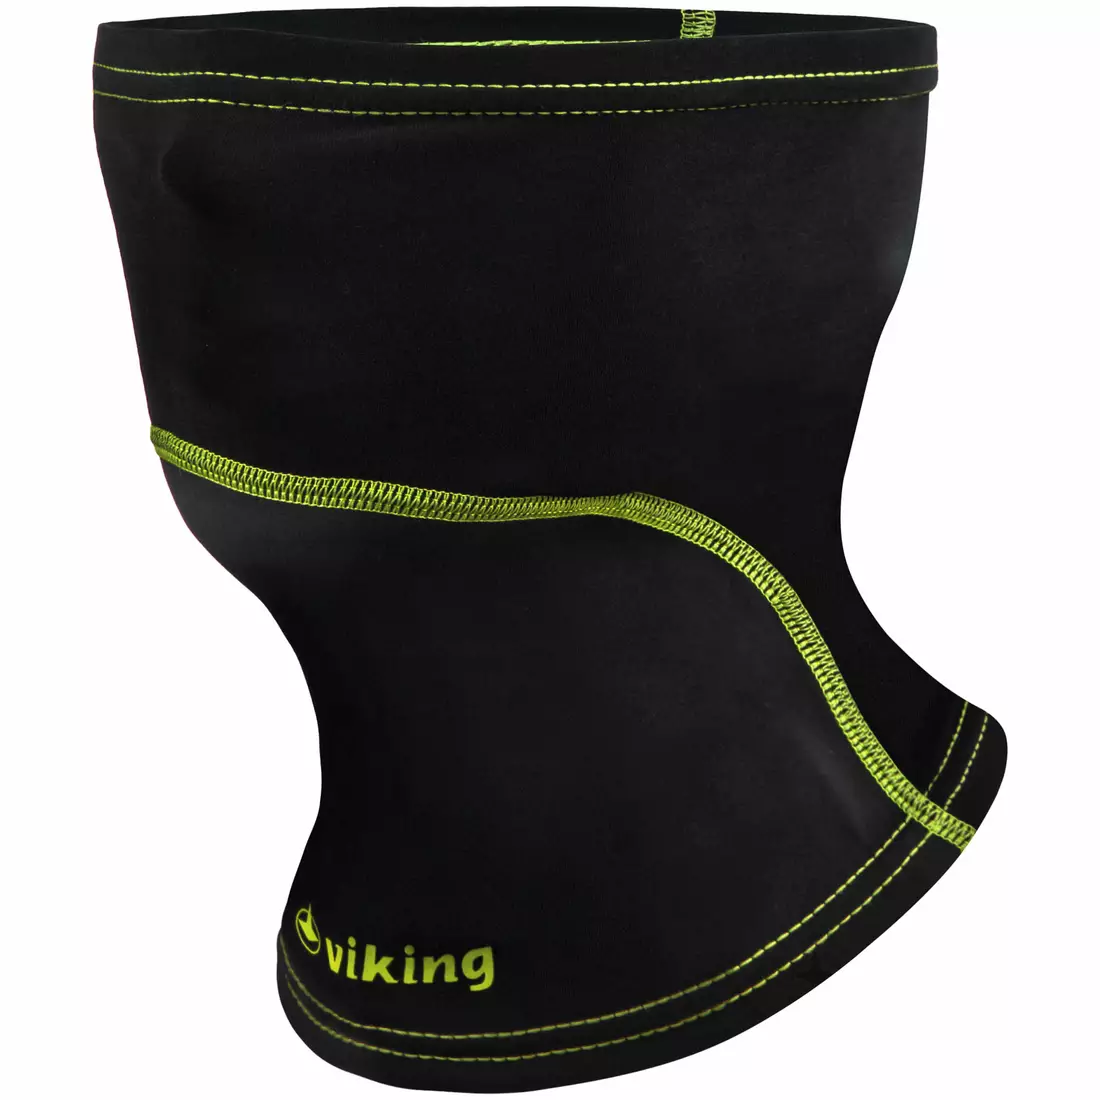 VIKING Gore Windstopper mask tube collar 290/17 / 2004-72 Parker black with green stitching